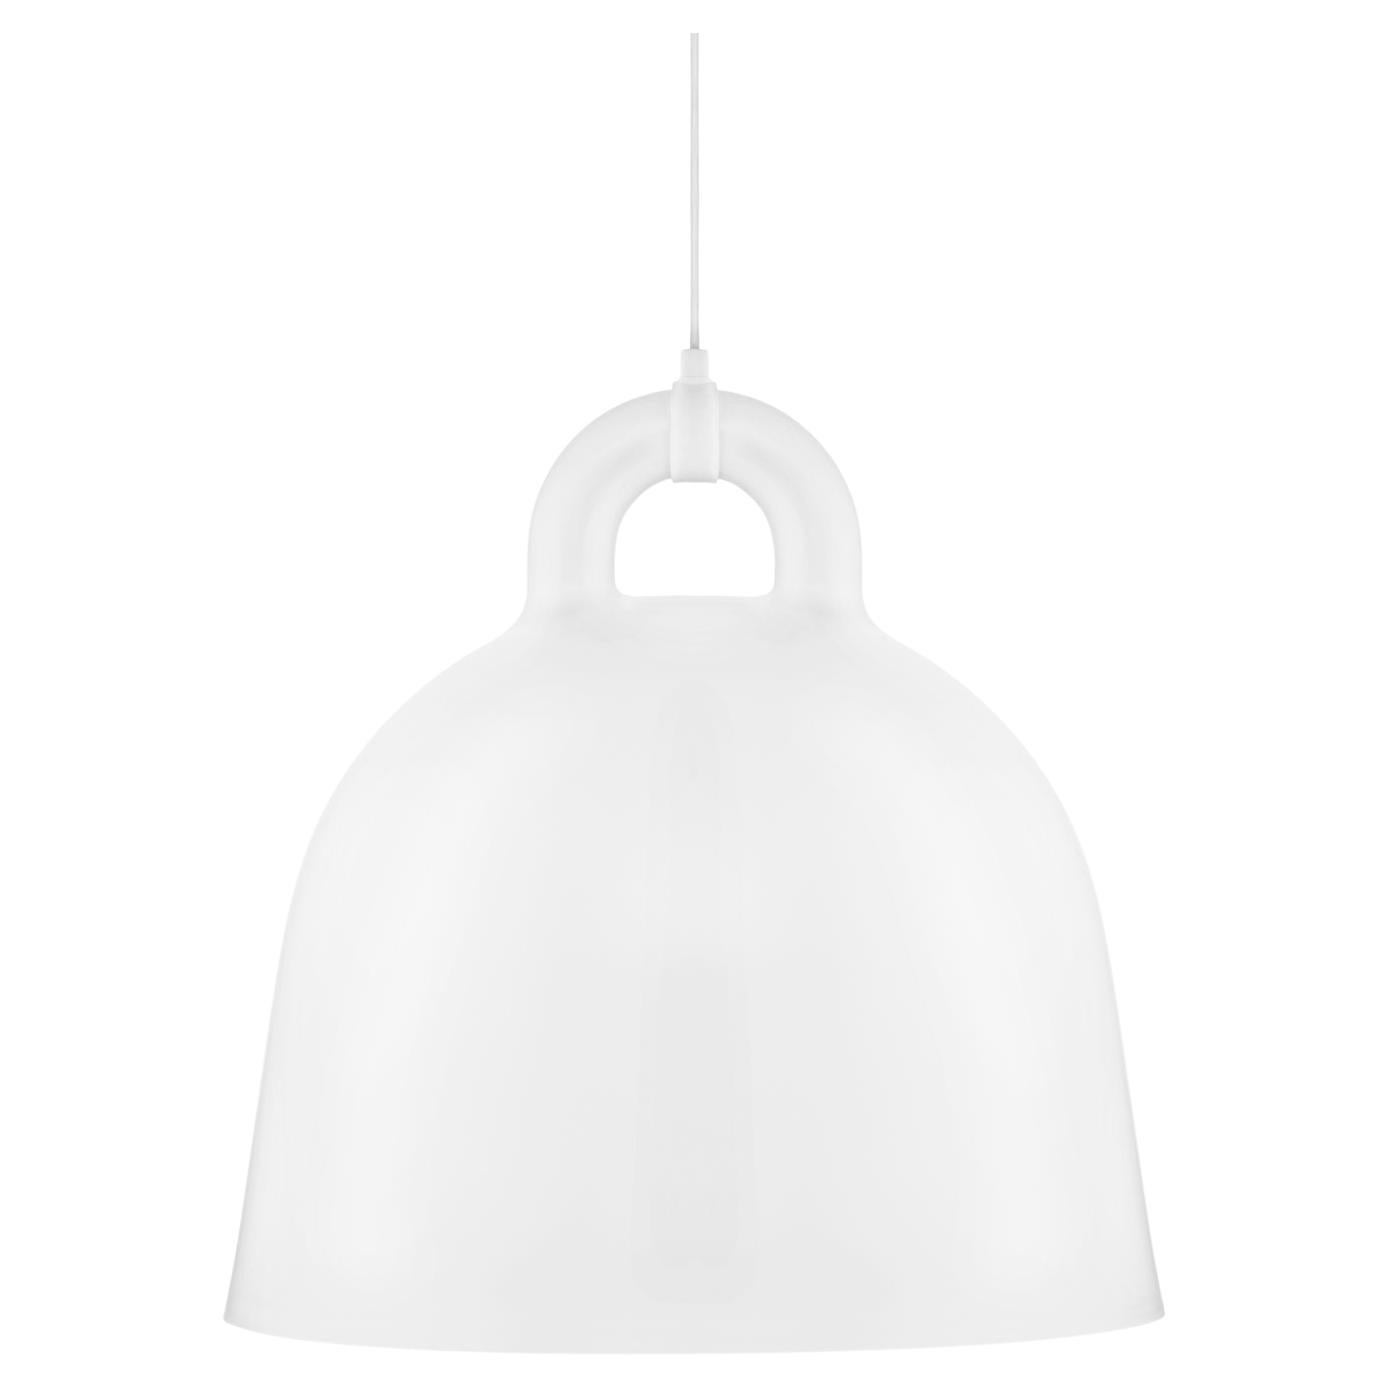 Normann Copenhagen Bell Pendant Lamp Small by Andreas Lund & Jacob Rudbeck